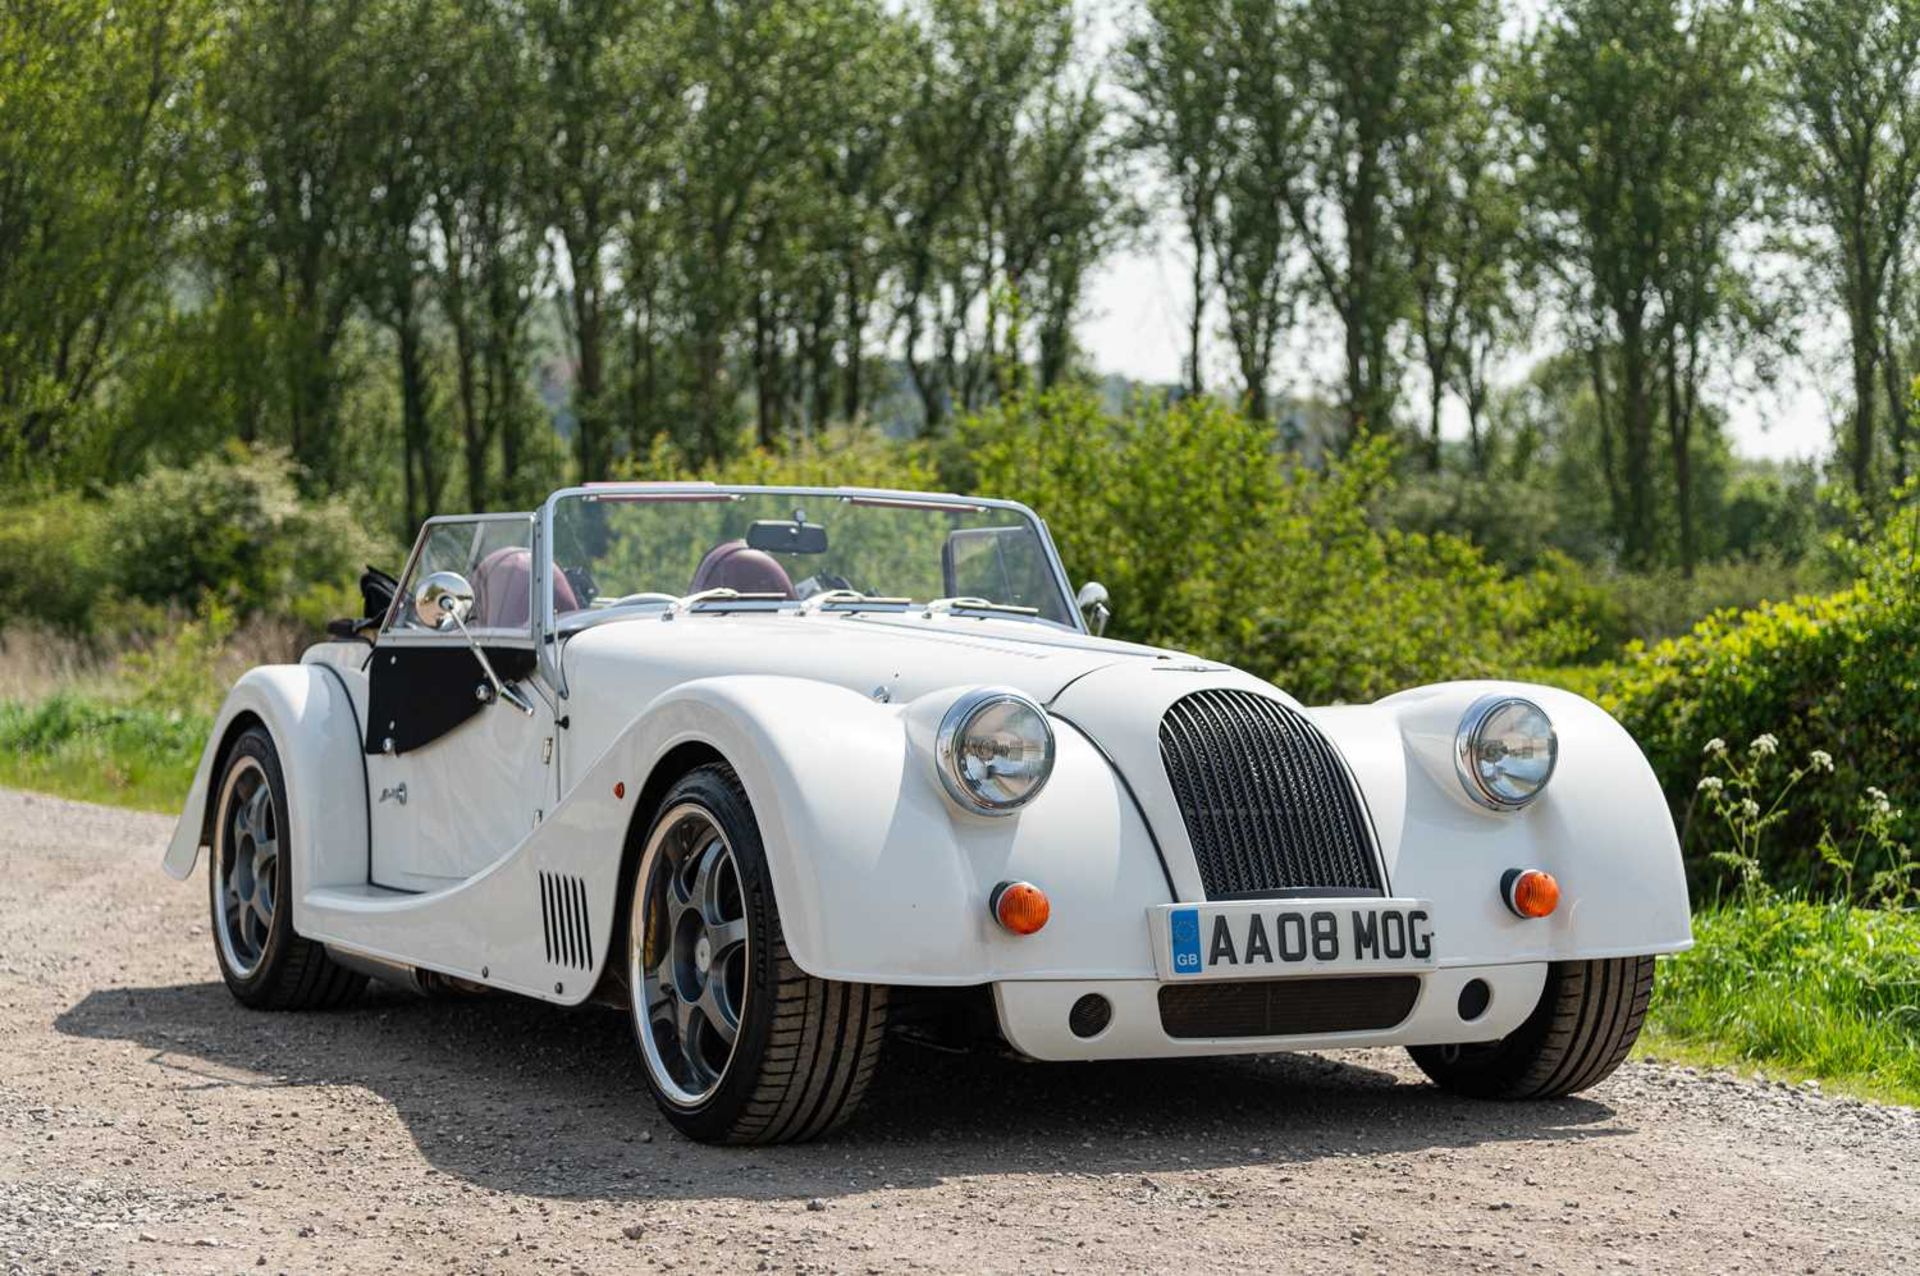 2012 Morgan Plus 8 ***NO RESERVE*** Believed to be one of just 60 produced and with MOT records supp - Image 2 of 74